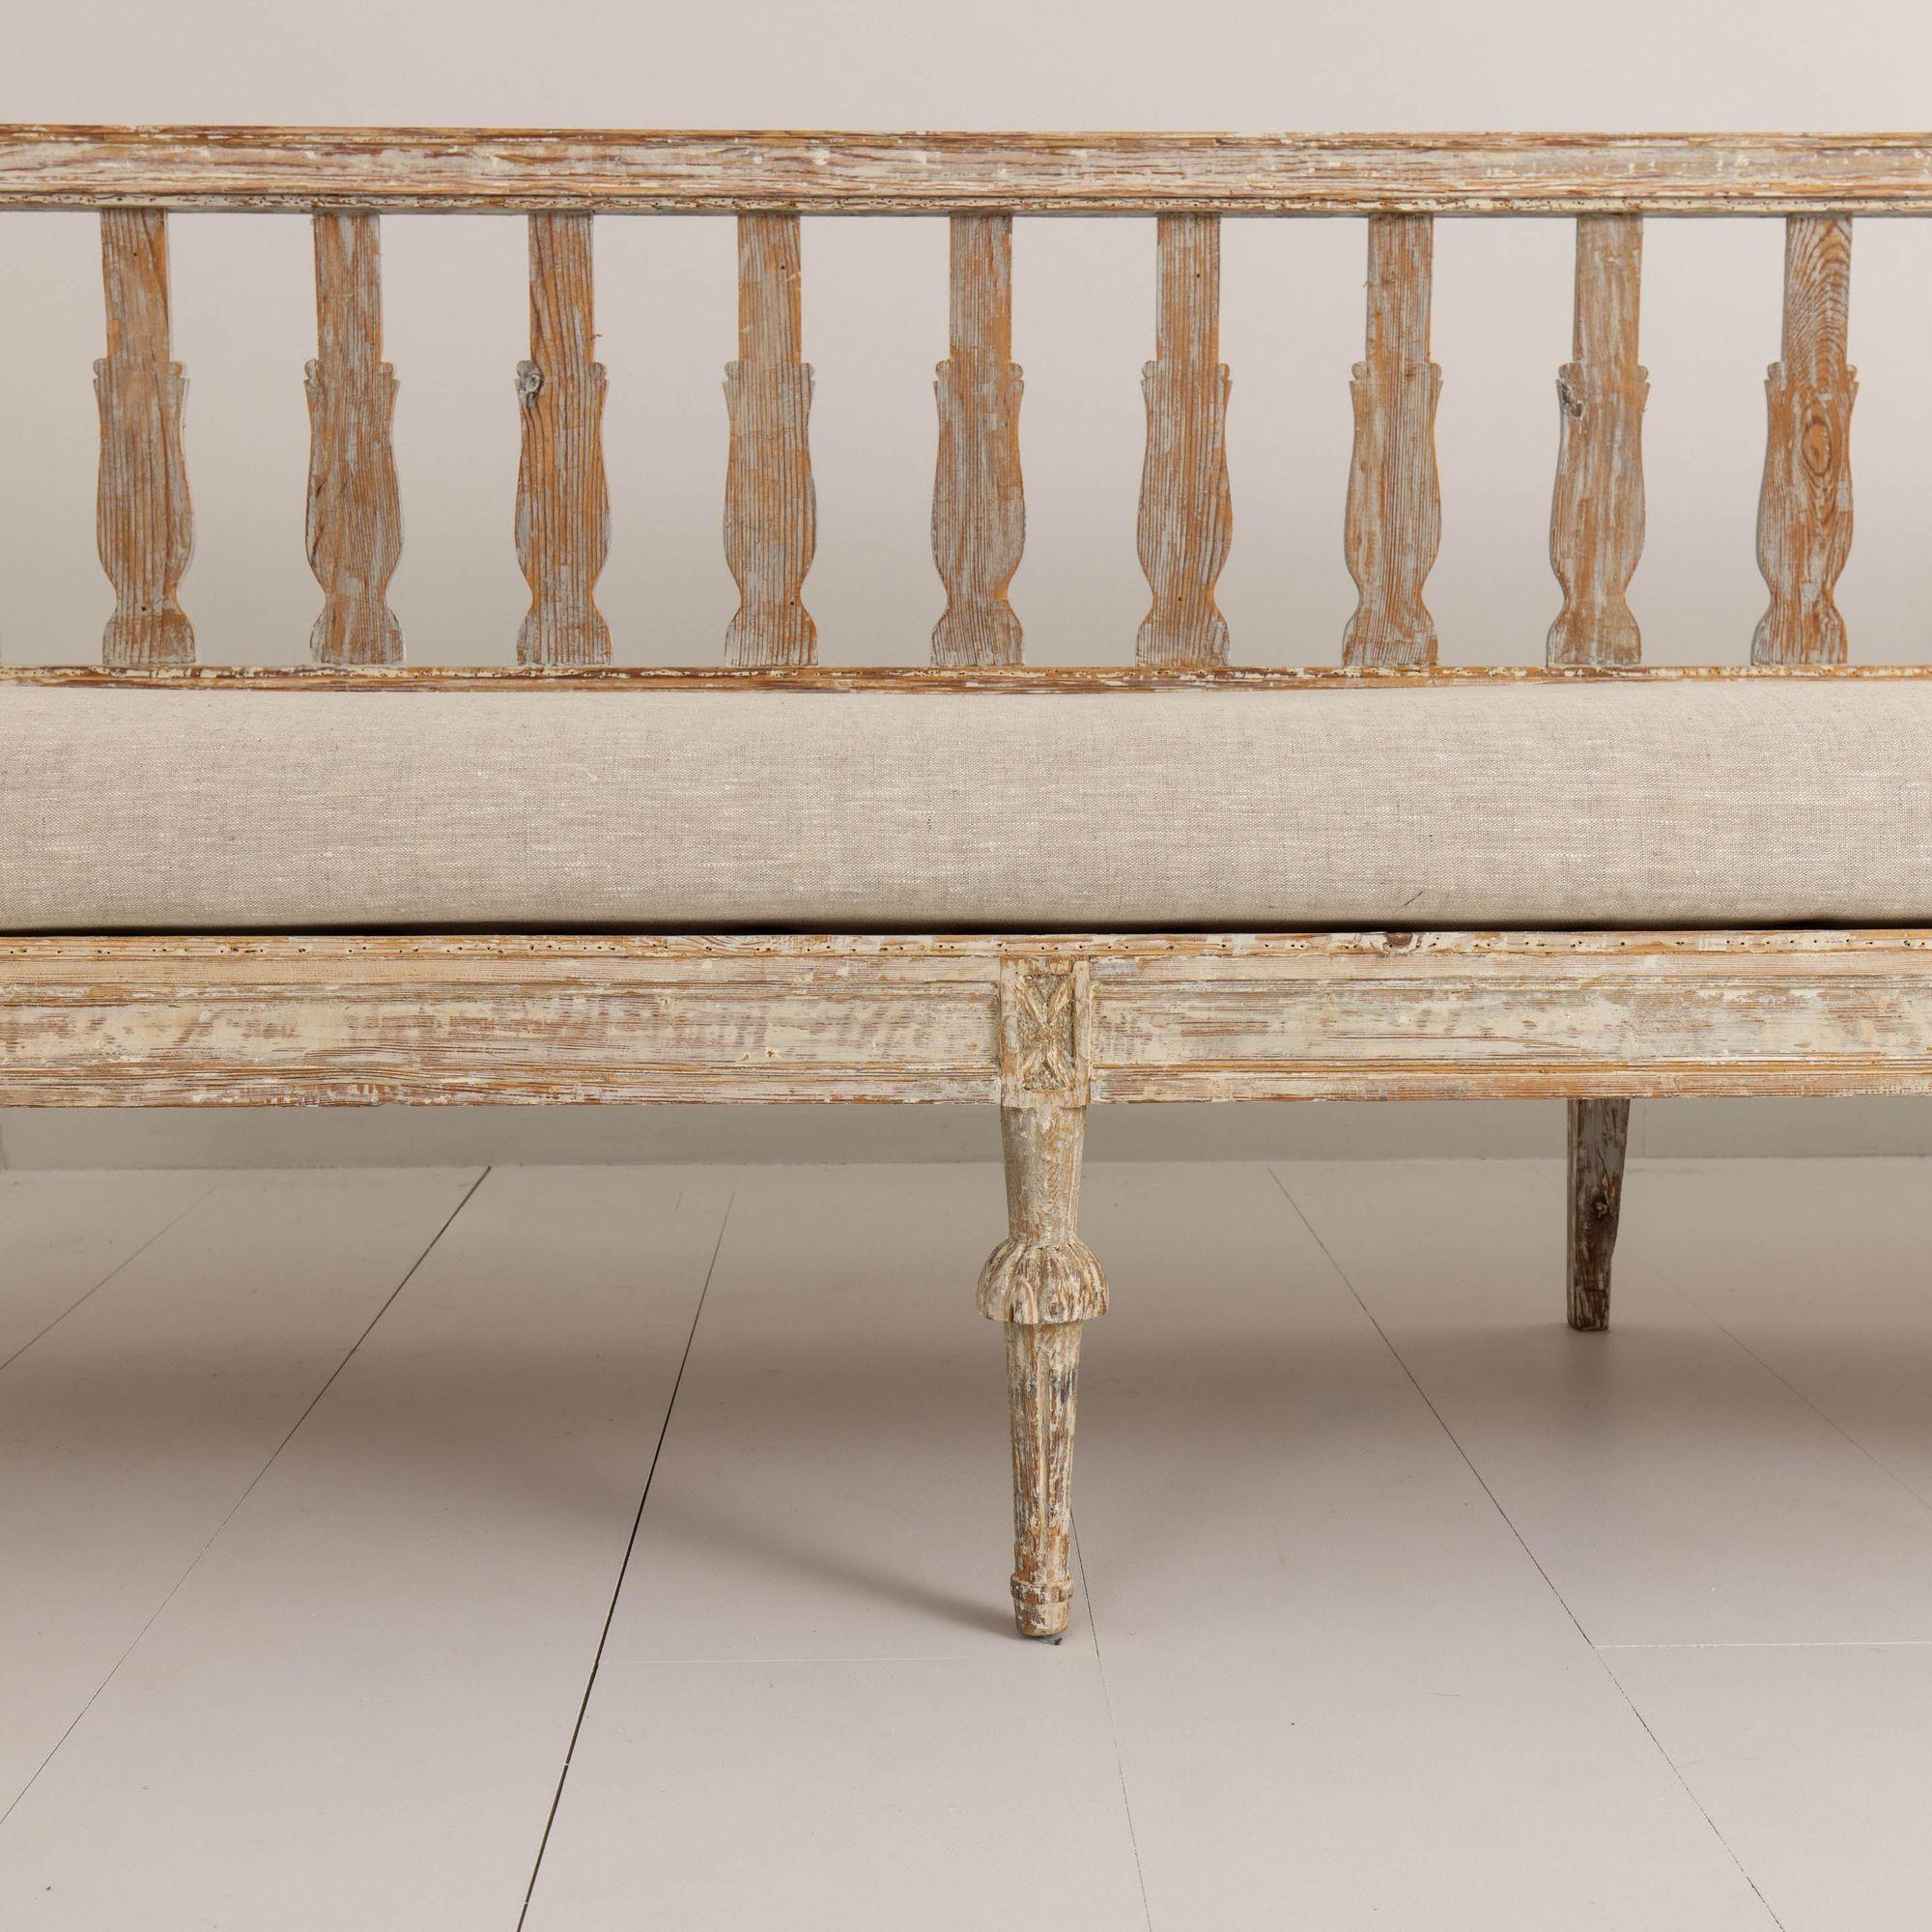 19th c. Swedish Gustavian Period Sofa Bench in Original Paint In Excellent Condition For Sale In Wichita, KS